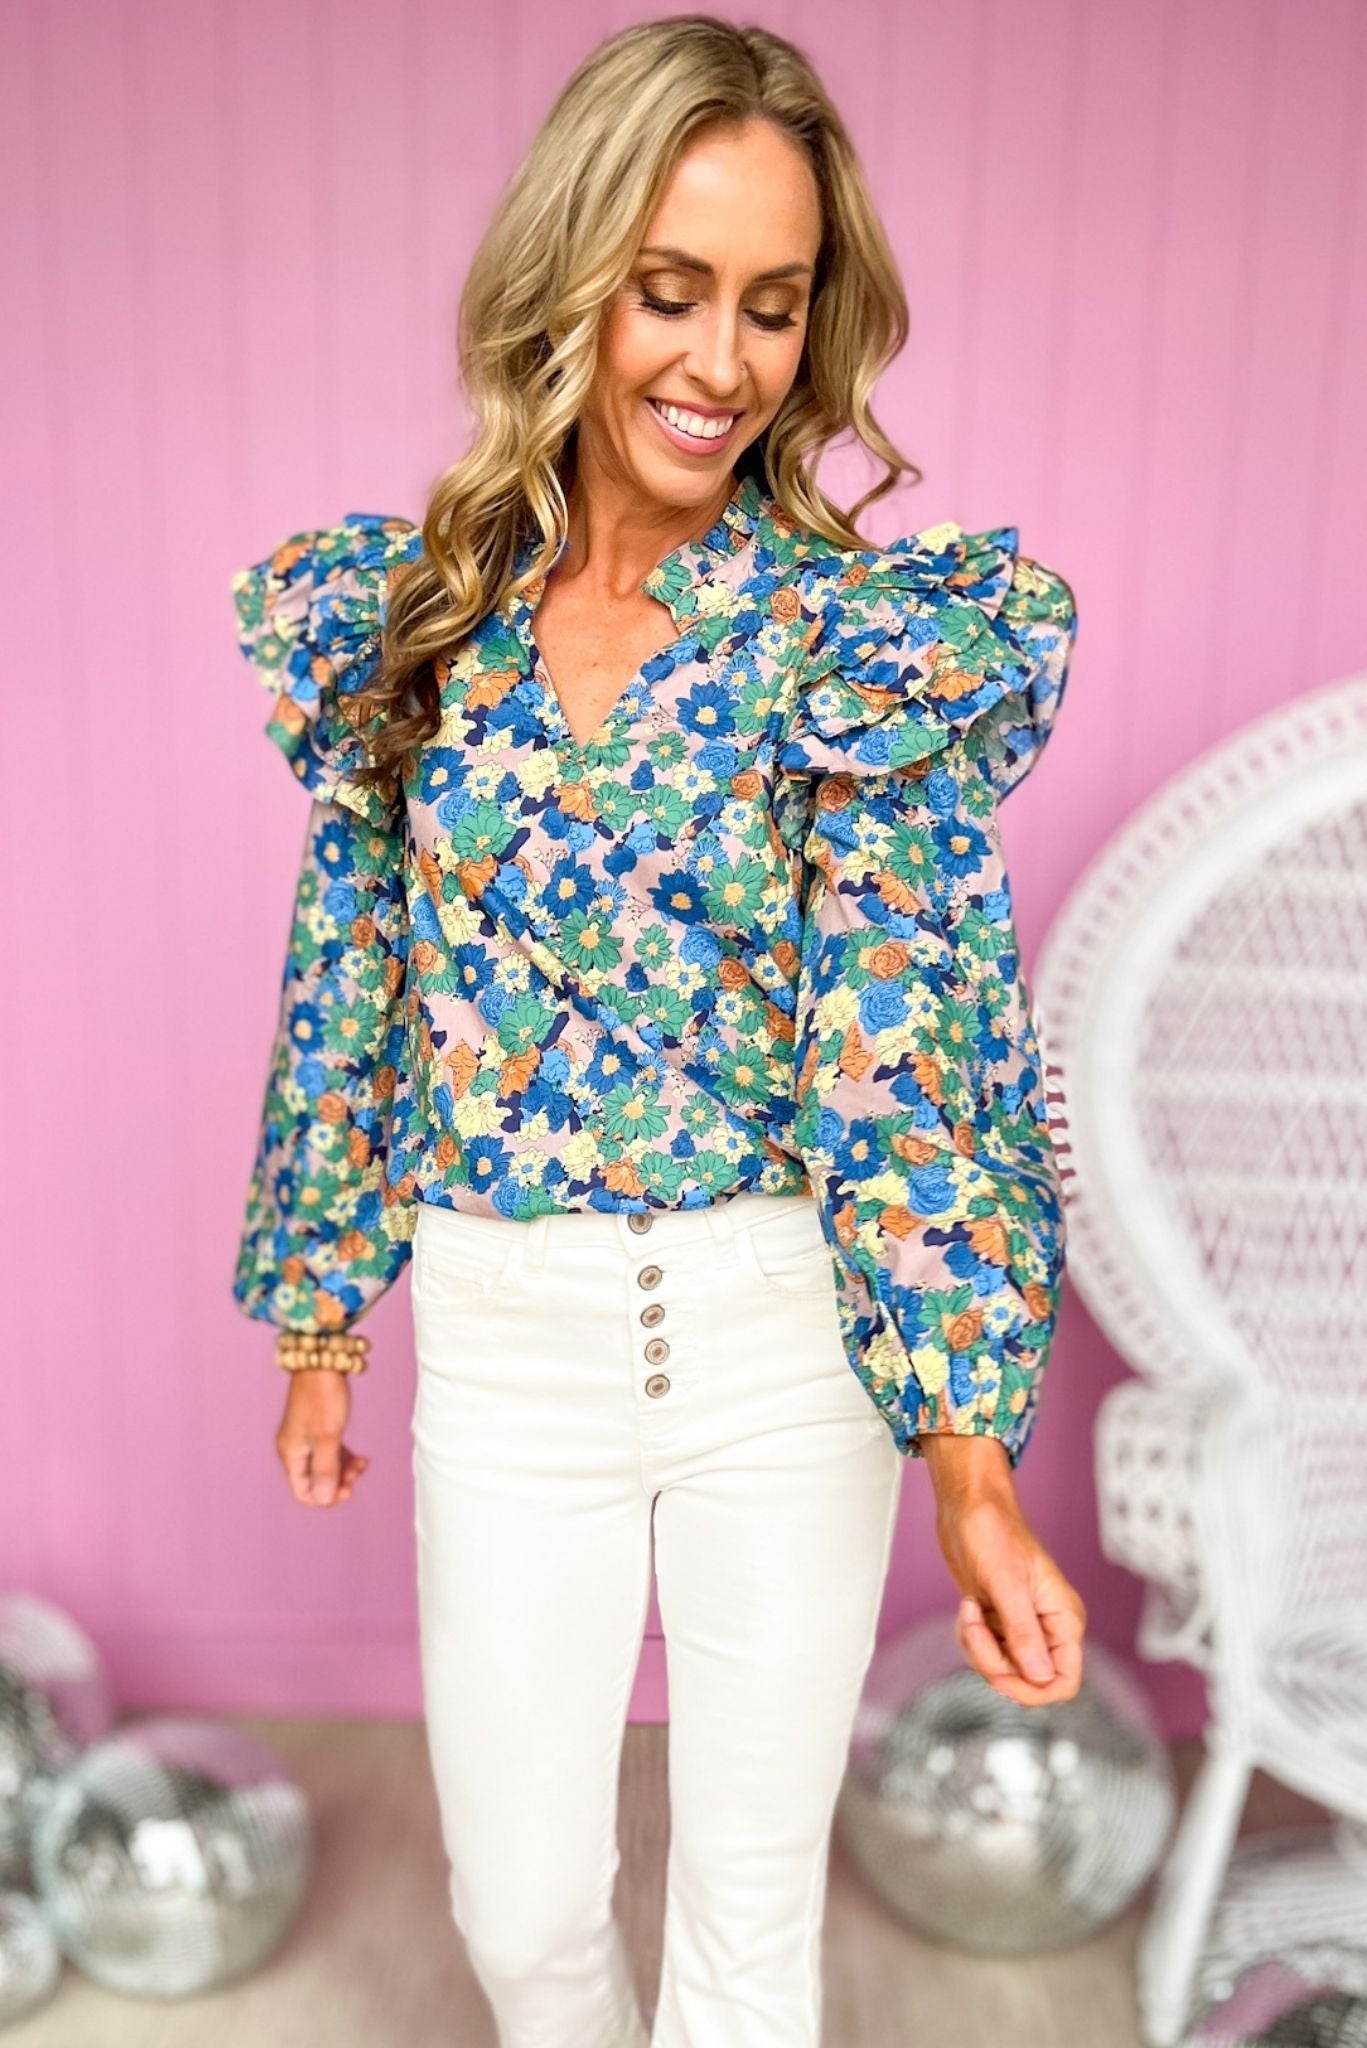 Blue Floral Ruffle Shoulder Frill Neck Long Sleeve Top. Tiny multi colored floral print. Blush background. Double ruffle shoulder. mom style. spring fashion. work to weekend. Shop Style Your Senses by Mallory Fitzsimmons.